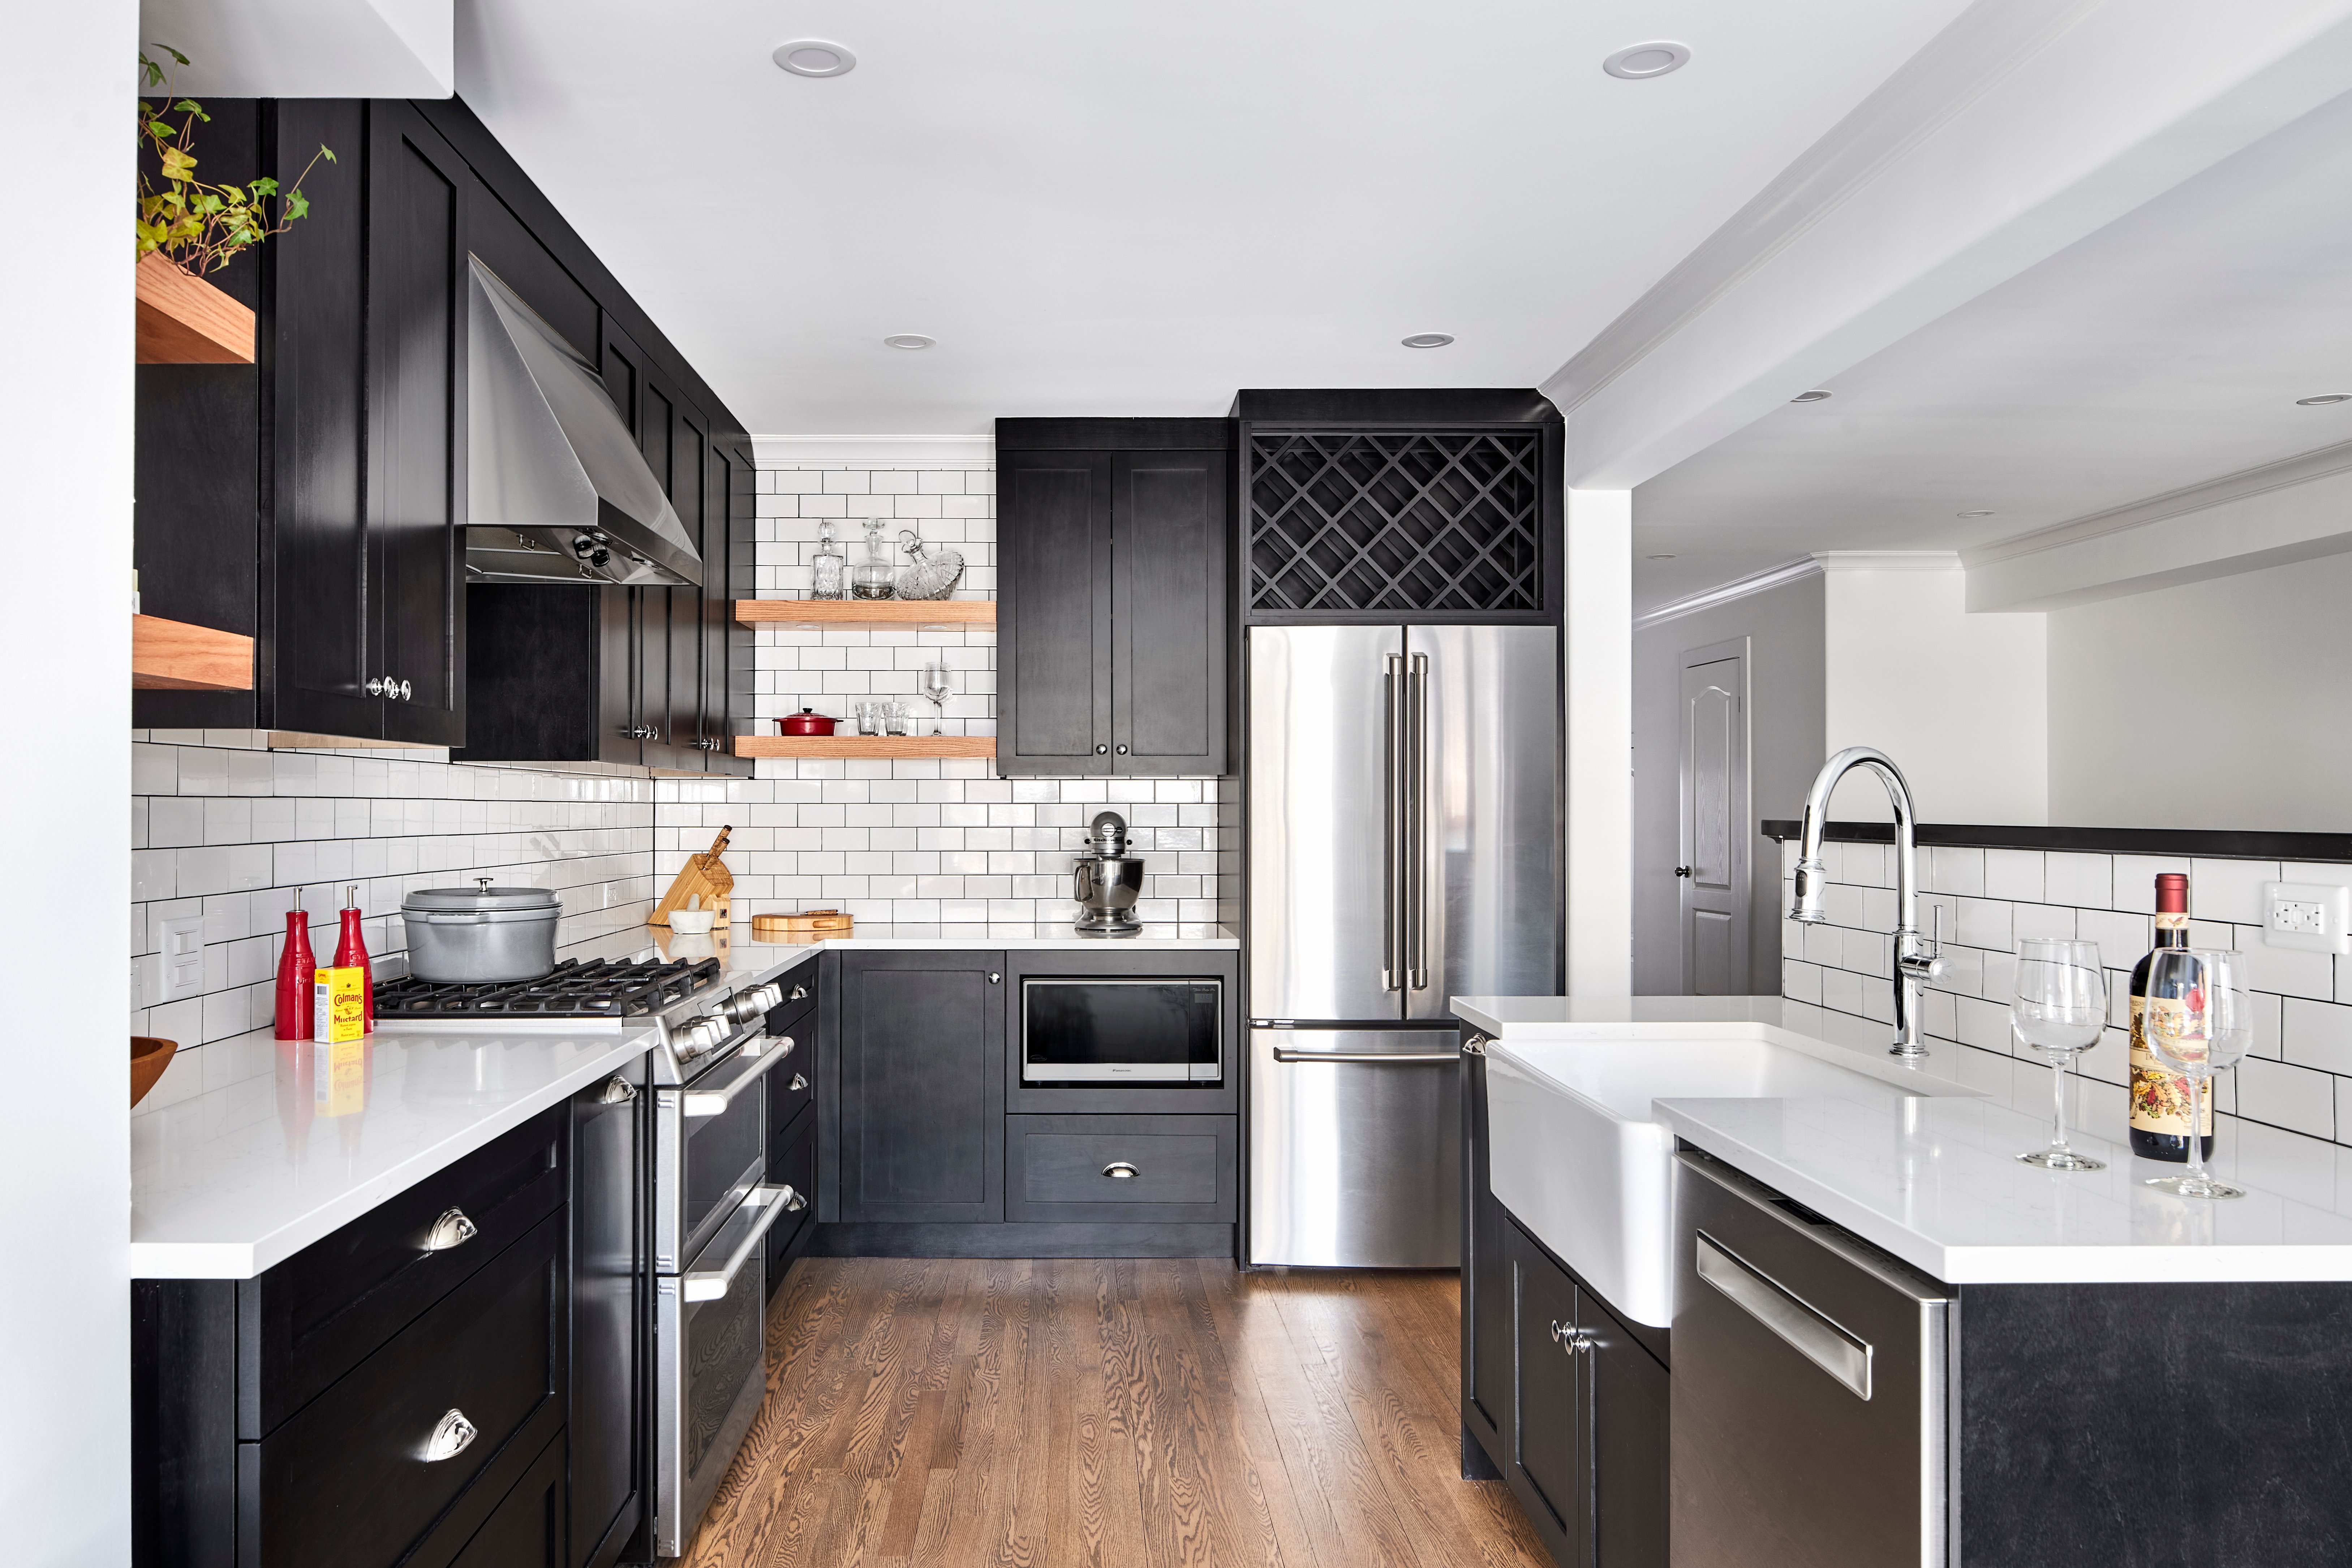 A classy, custom kitchen with Ebony-stained cabinets.